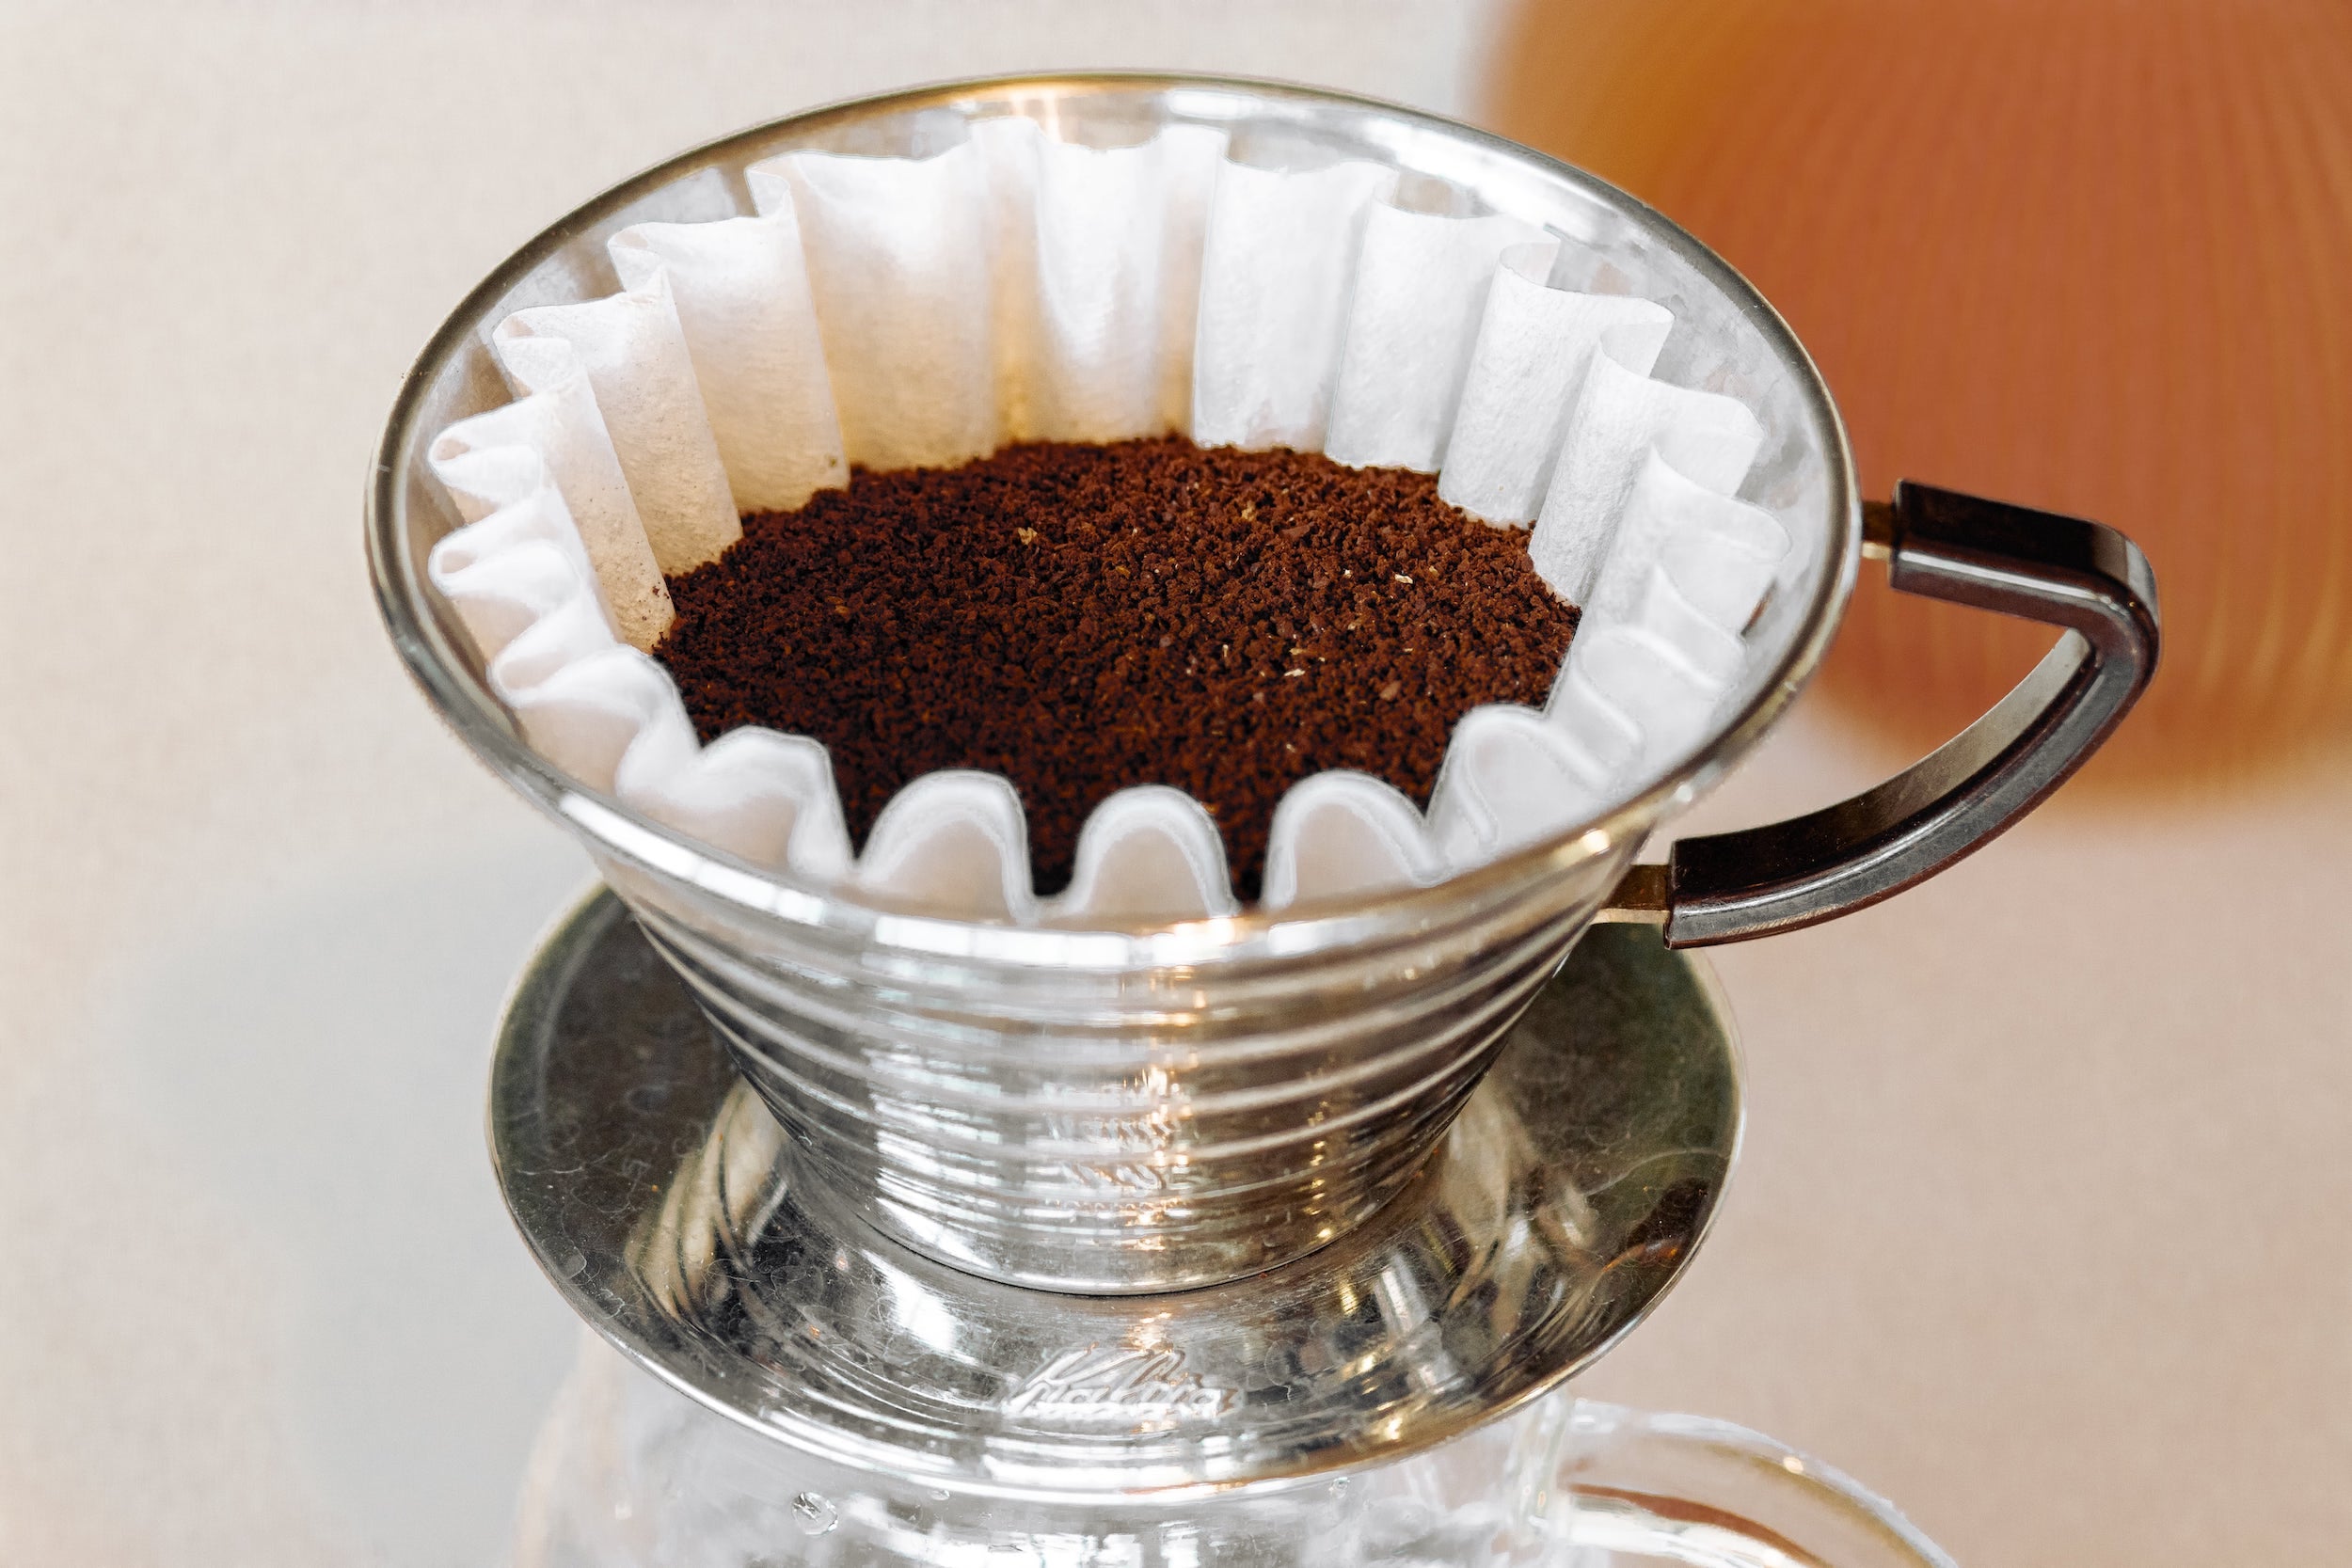 Freshly ground coffee in a Kalita brewer